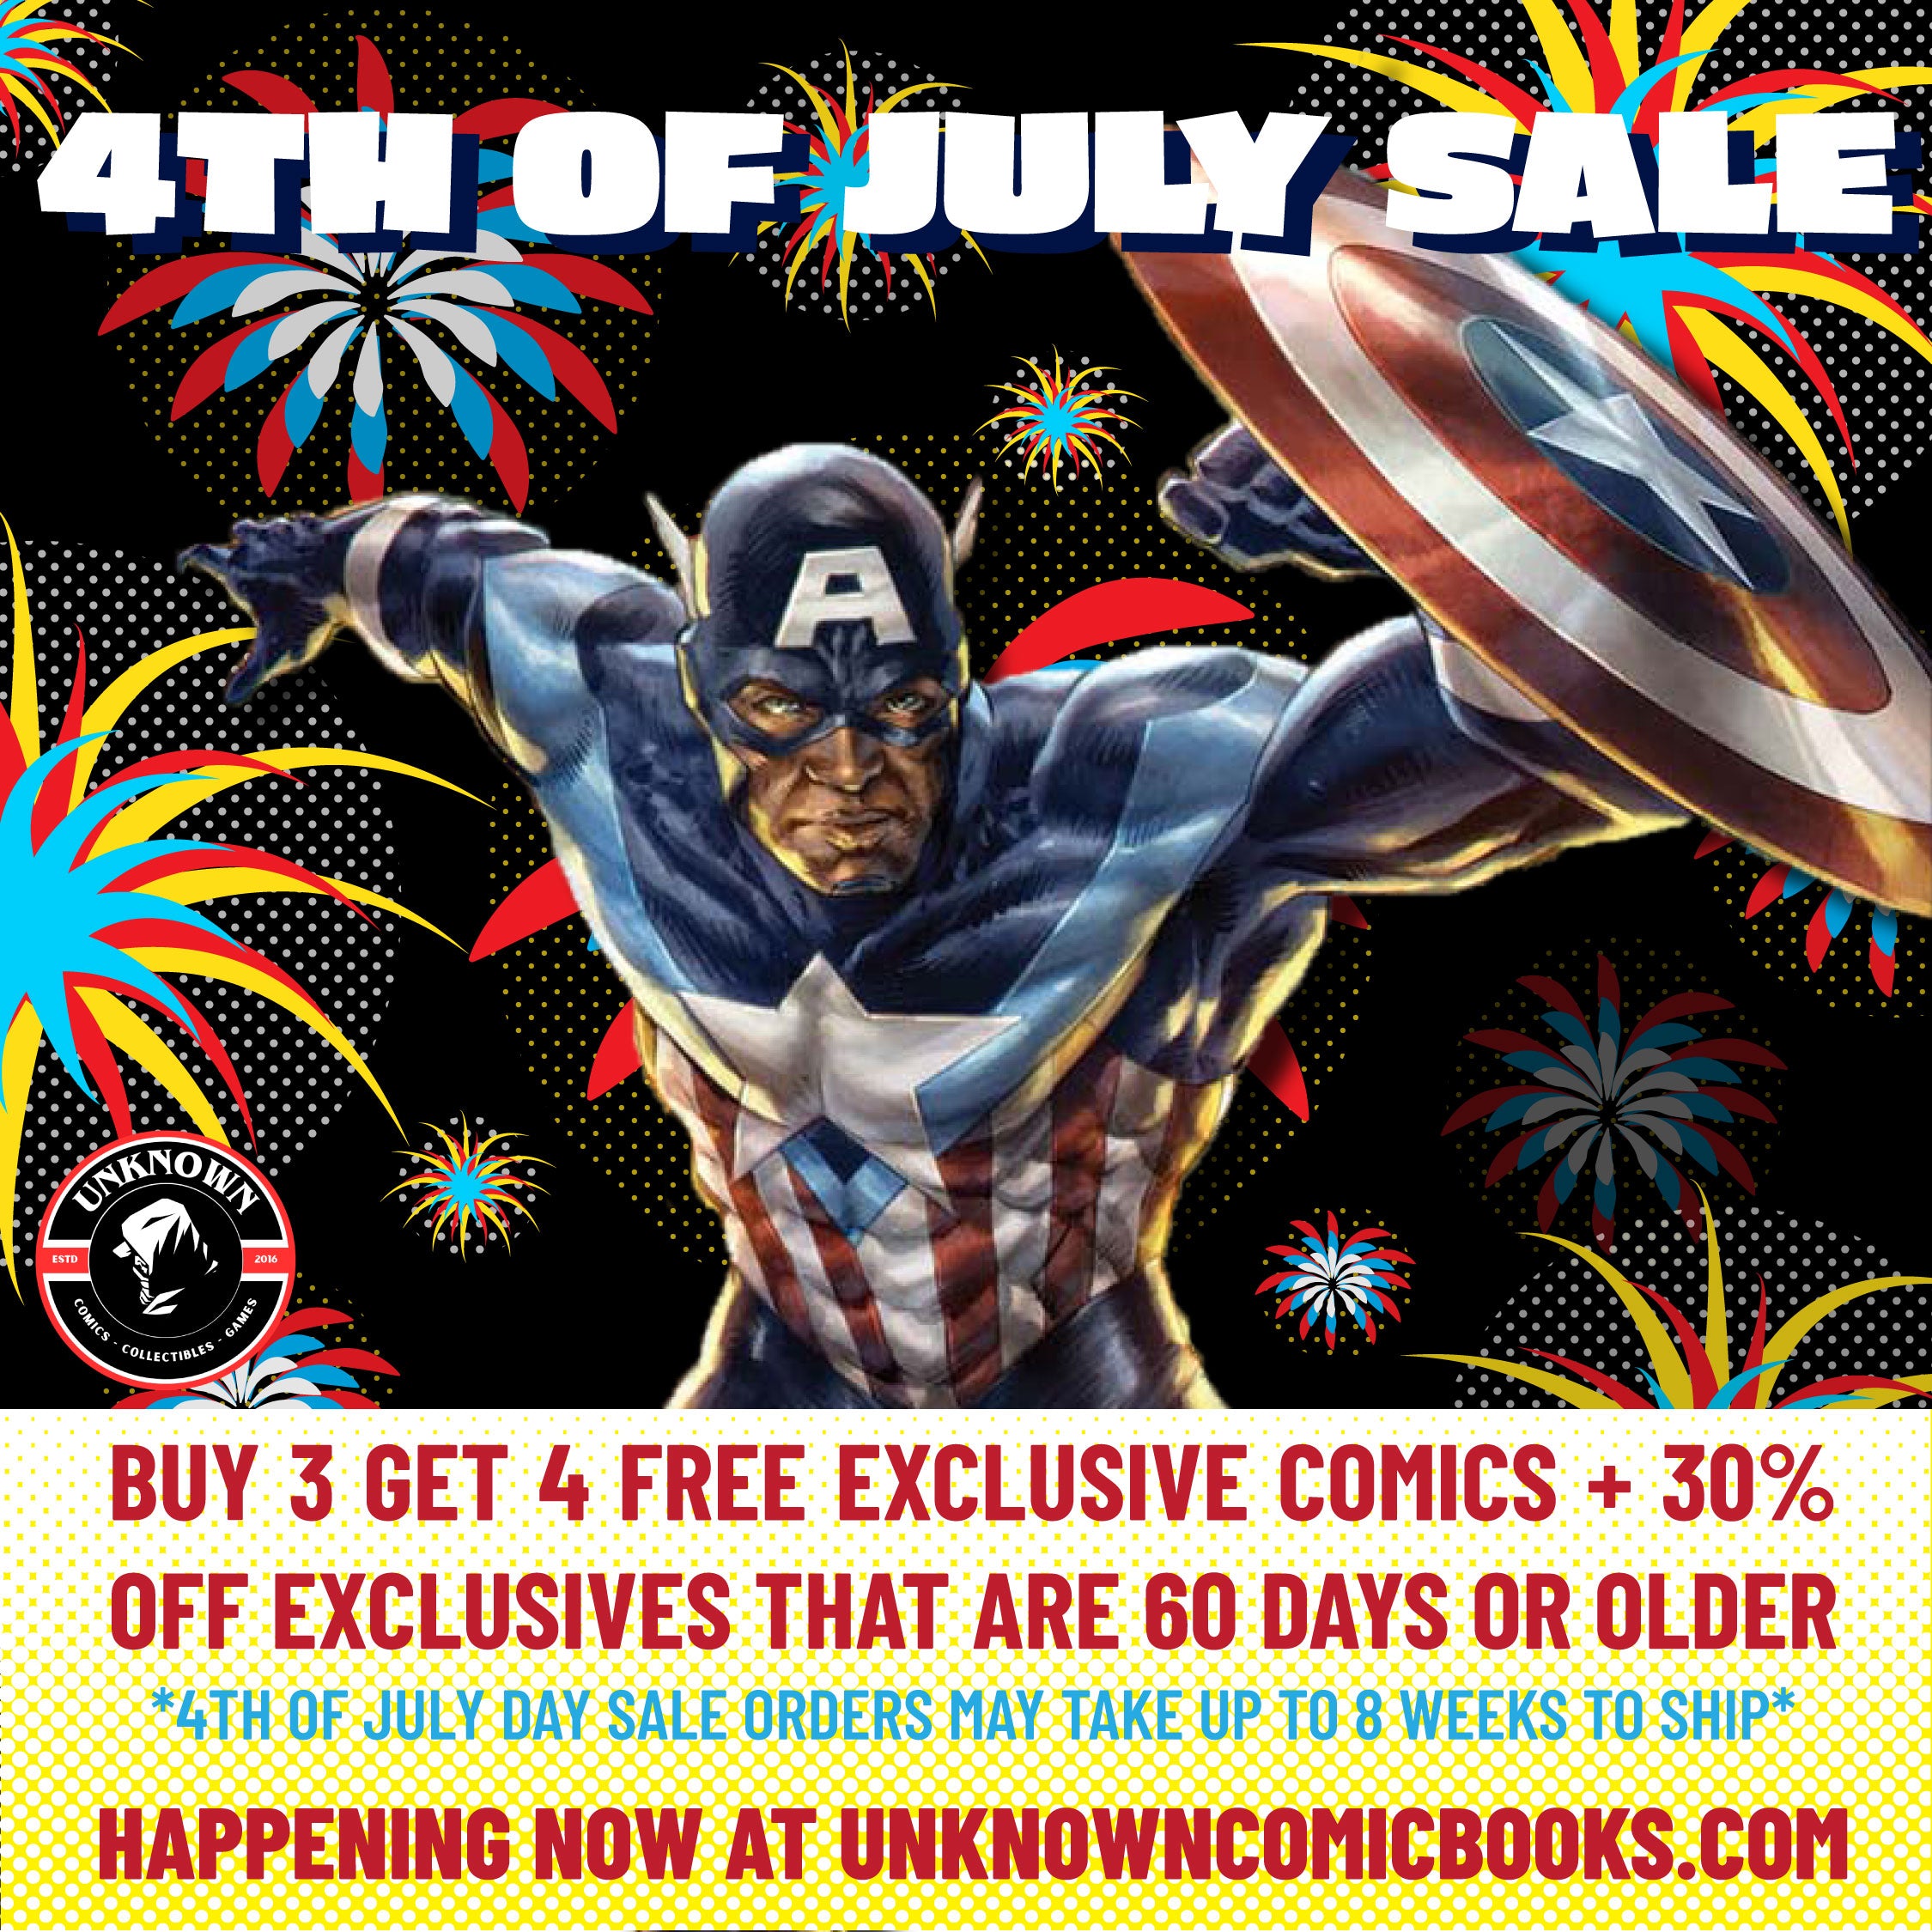 4th of JULY SALE B3G4 +30% OFF